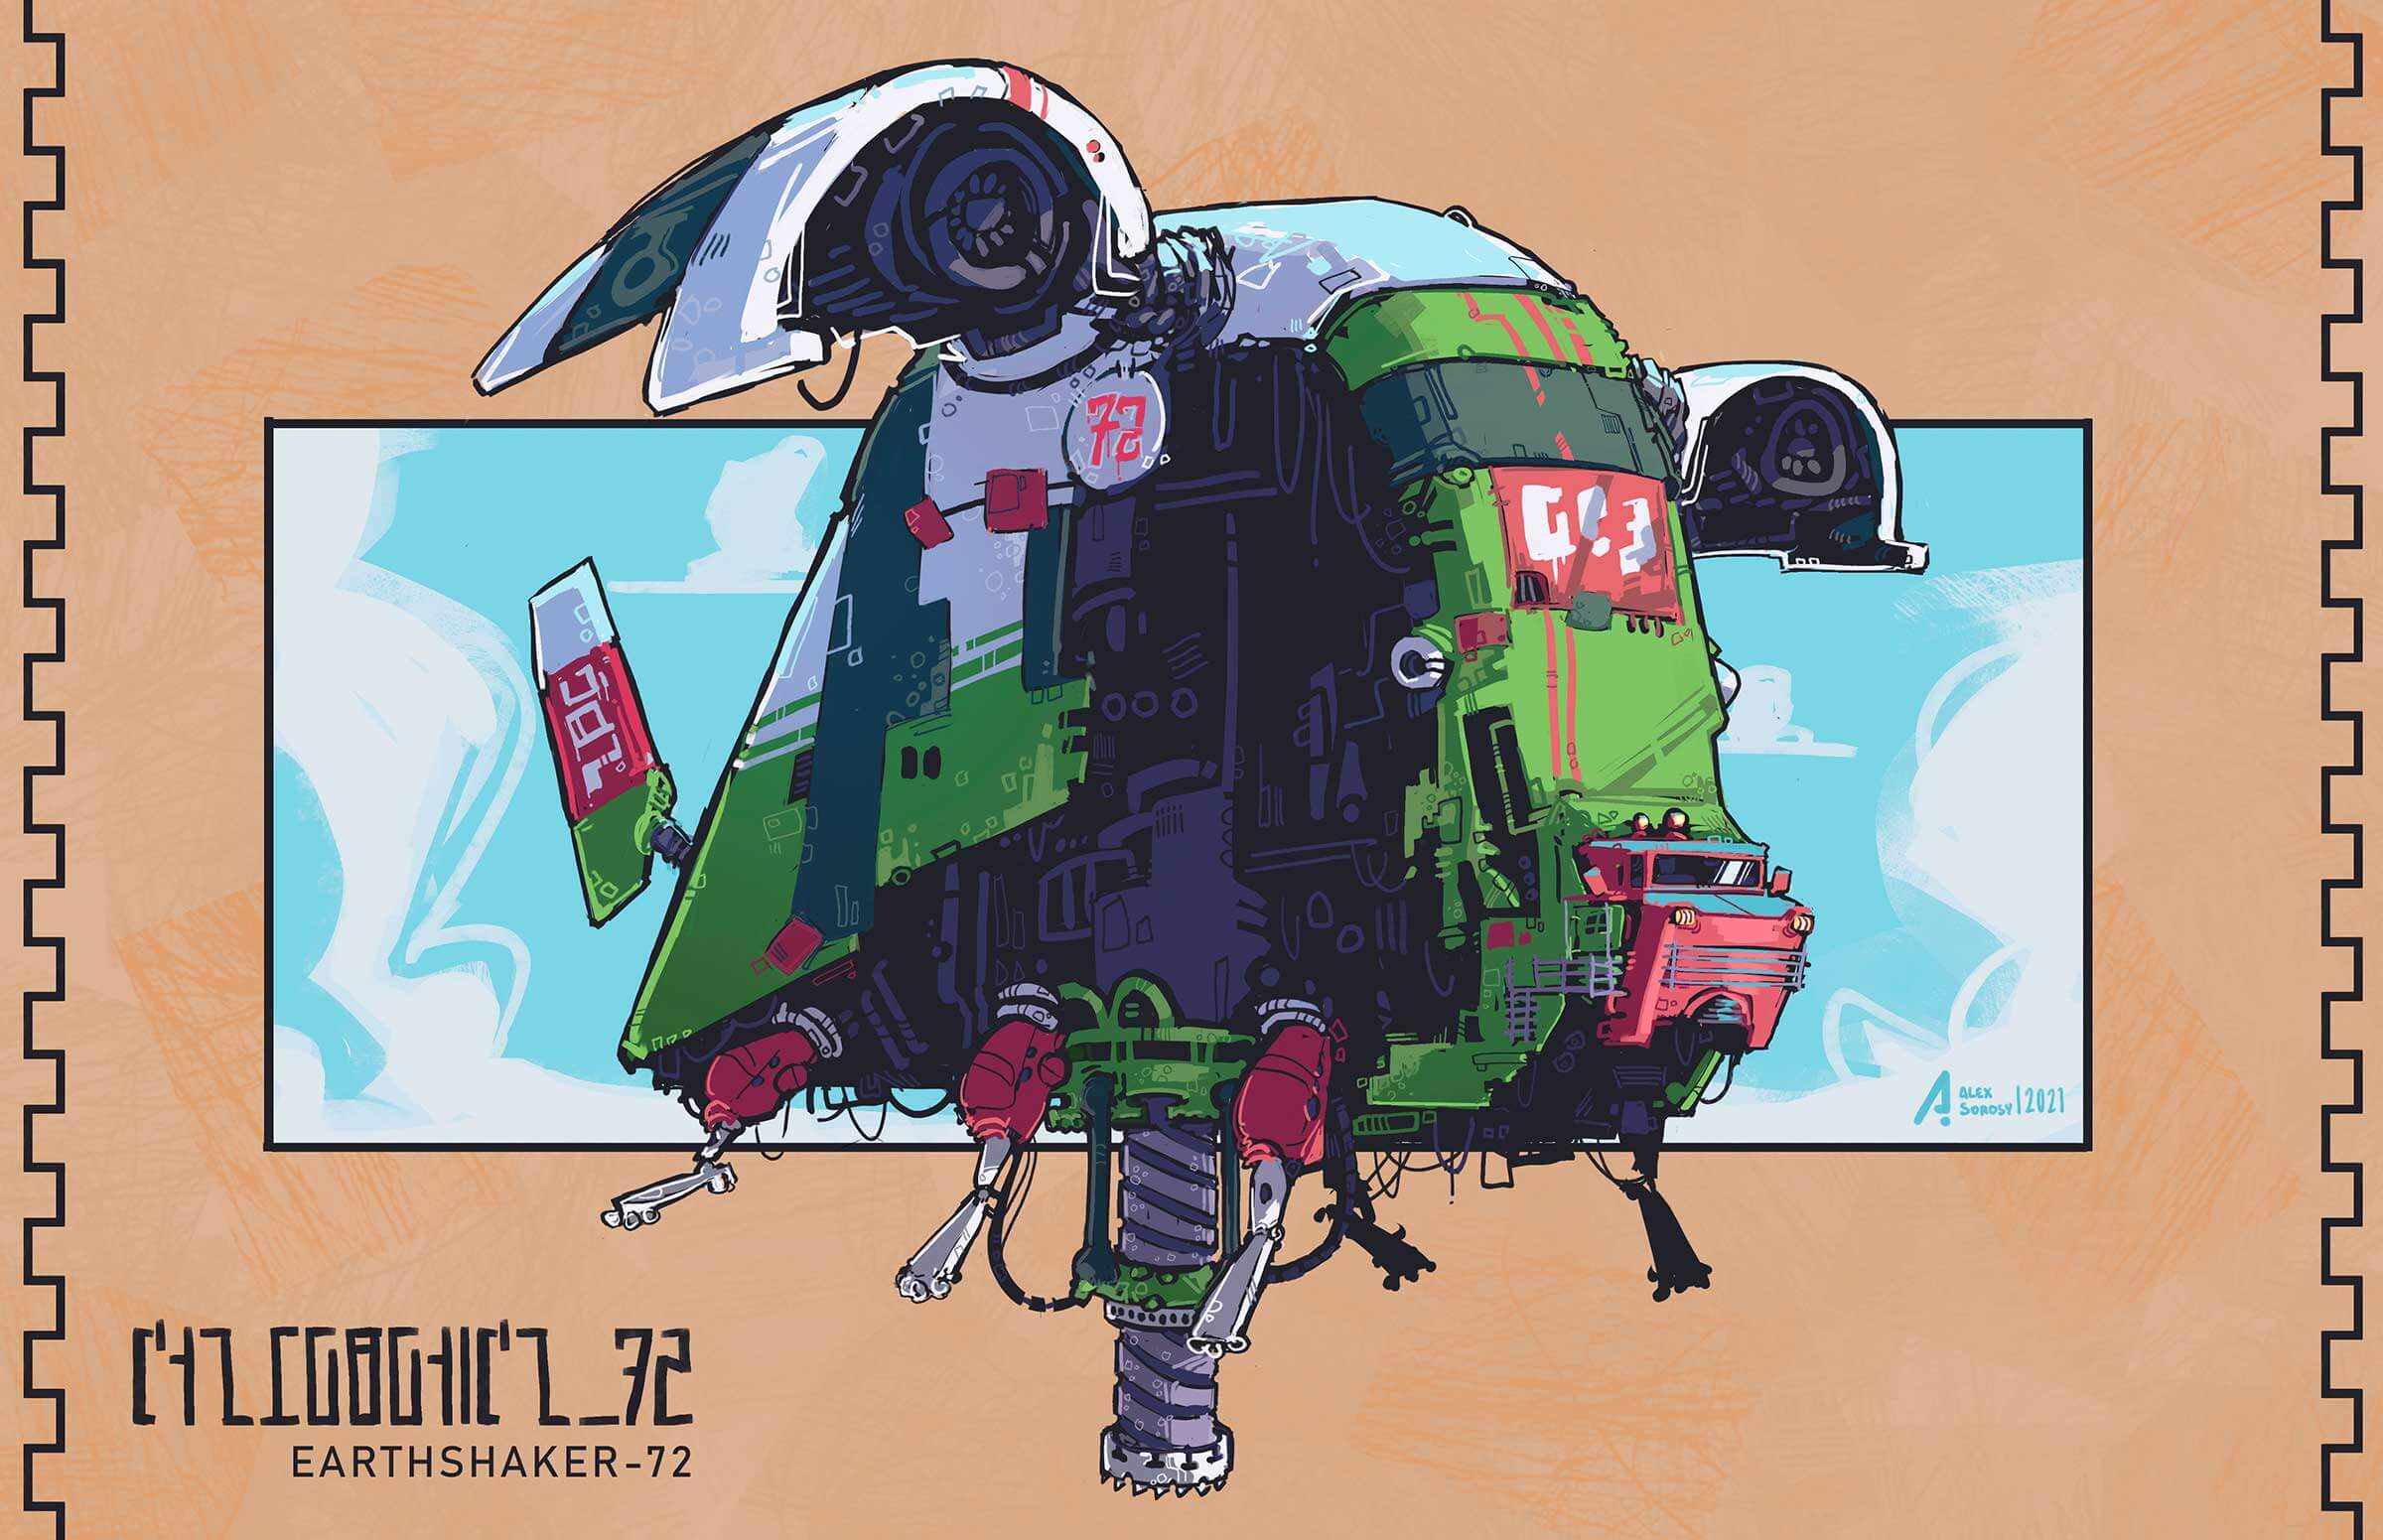 Art of a futuristic spaceship that is tall, chunky, and painted green.